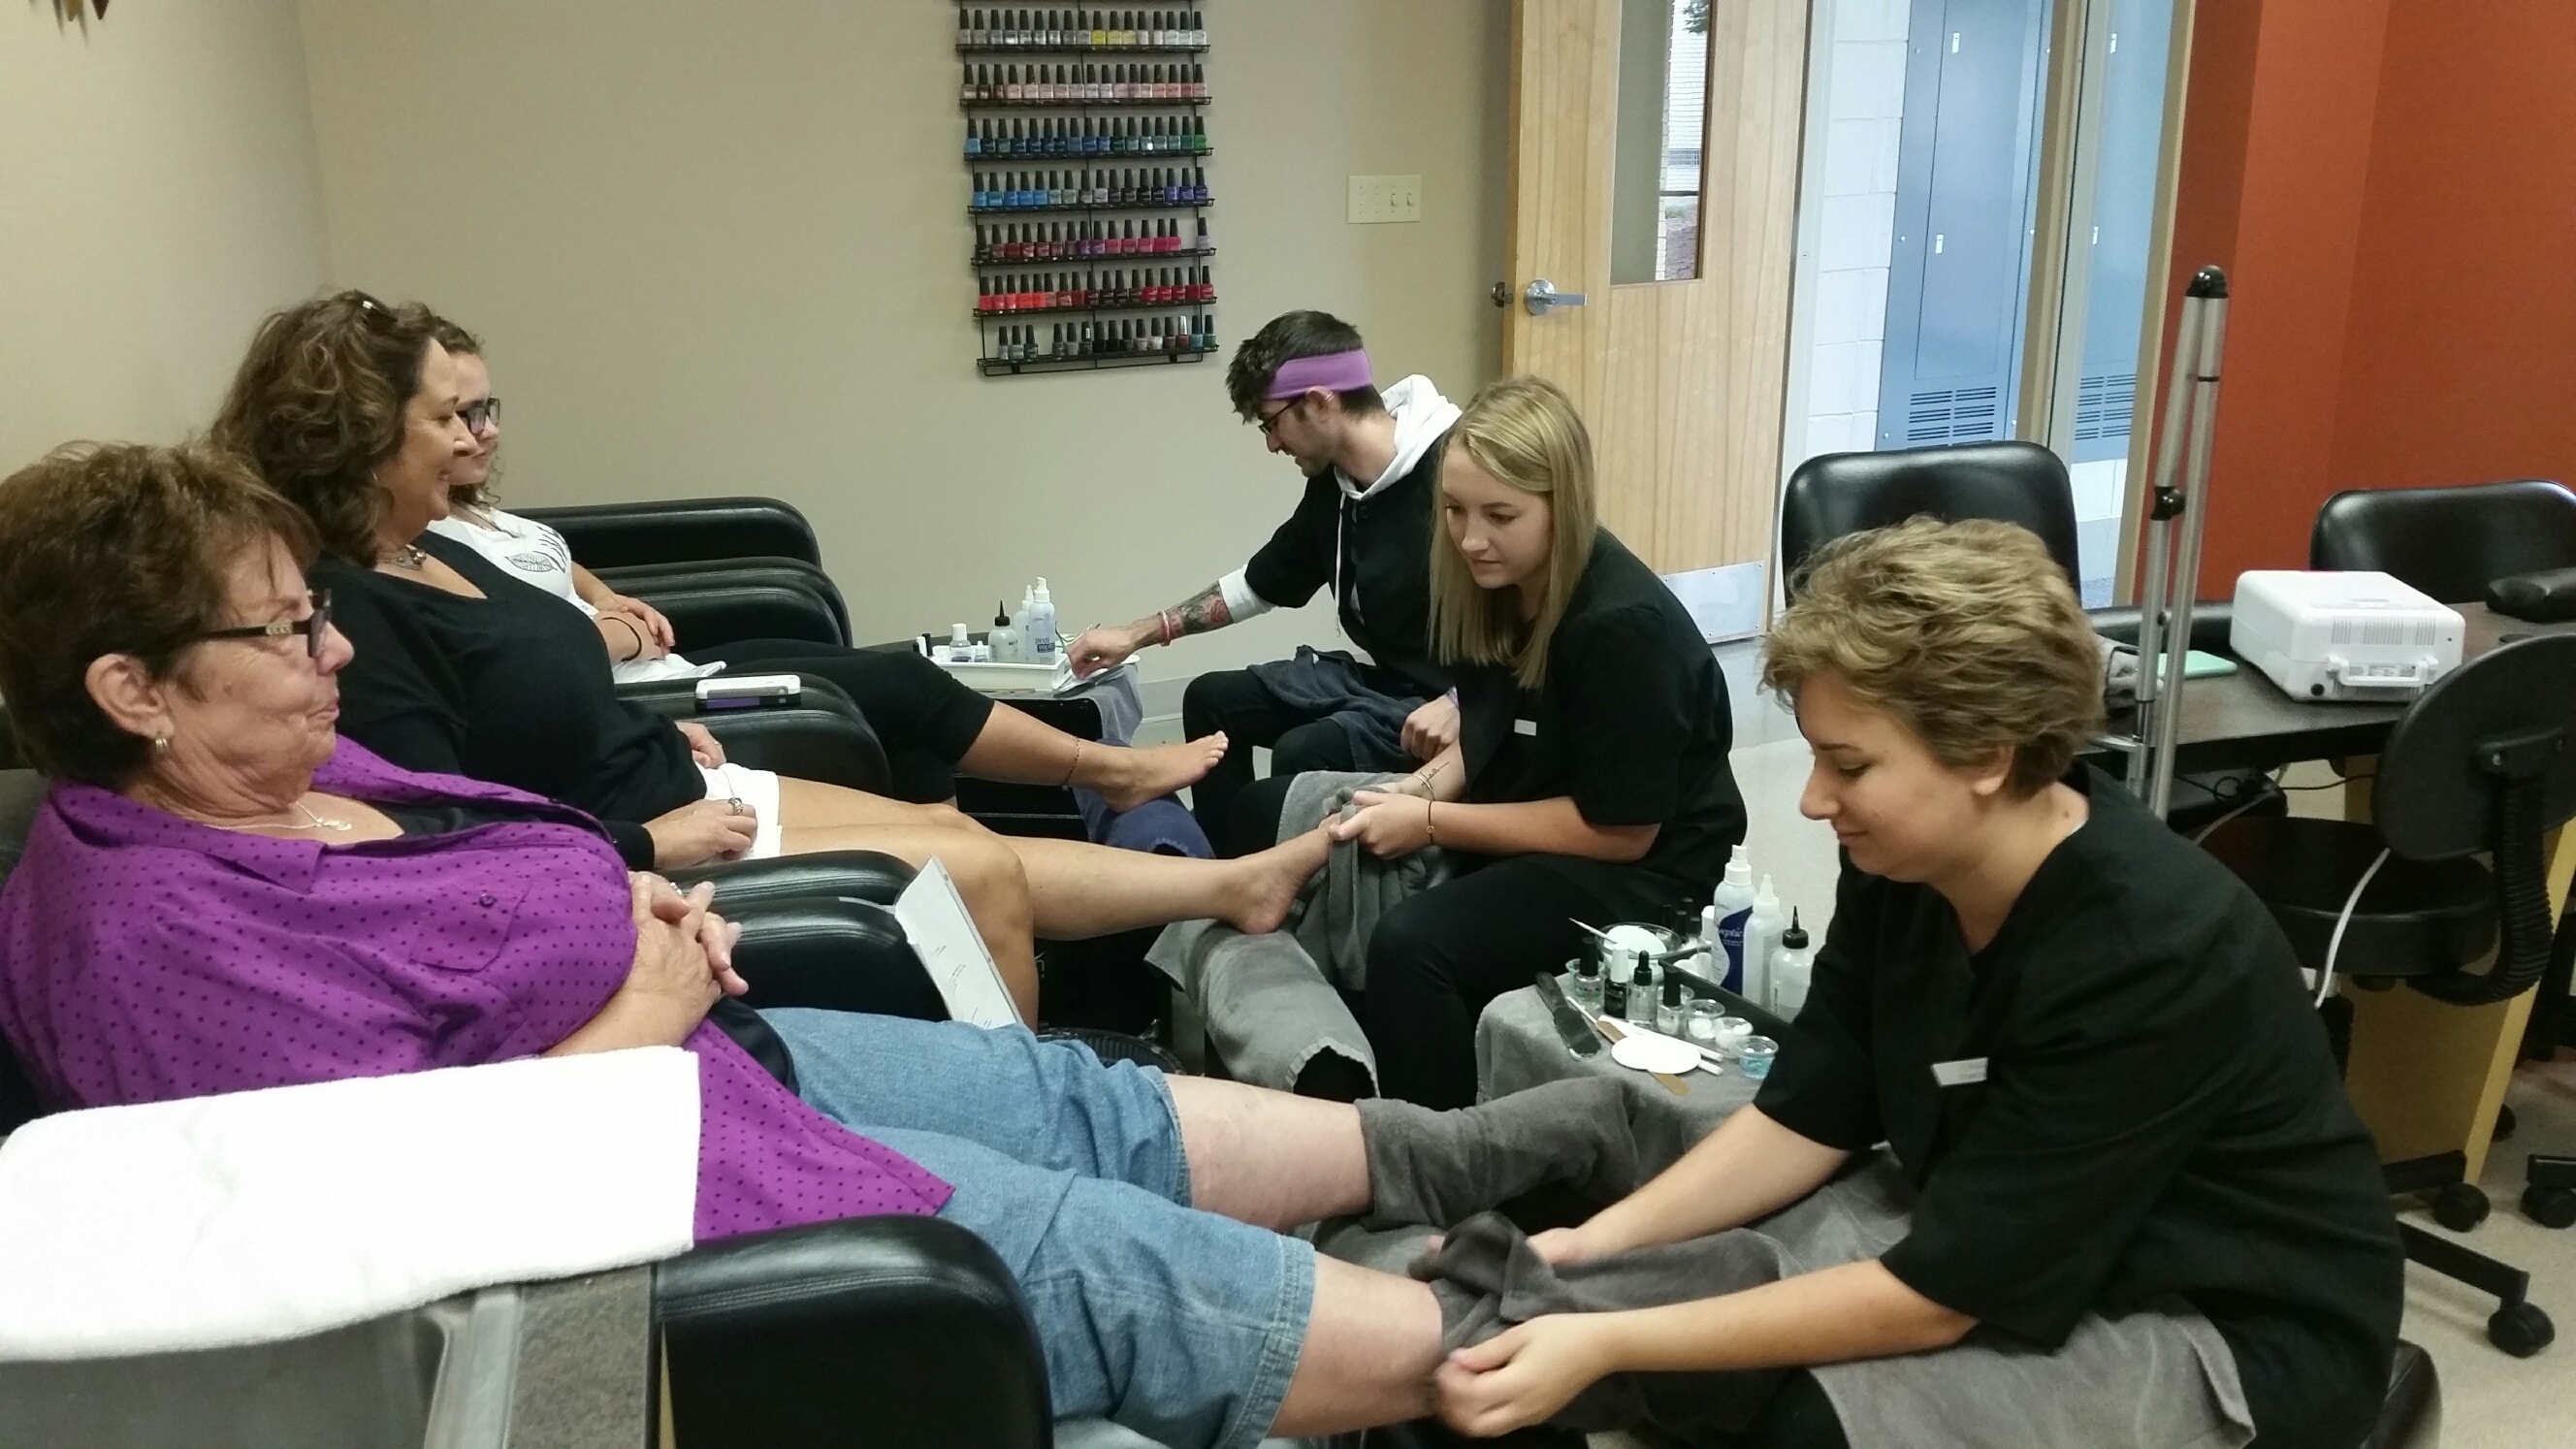 Pedicures done by moraine park students